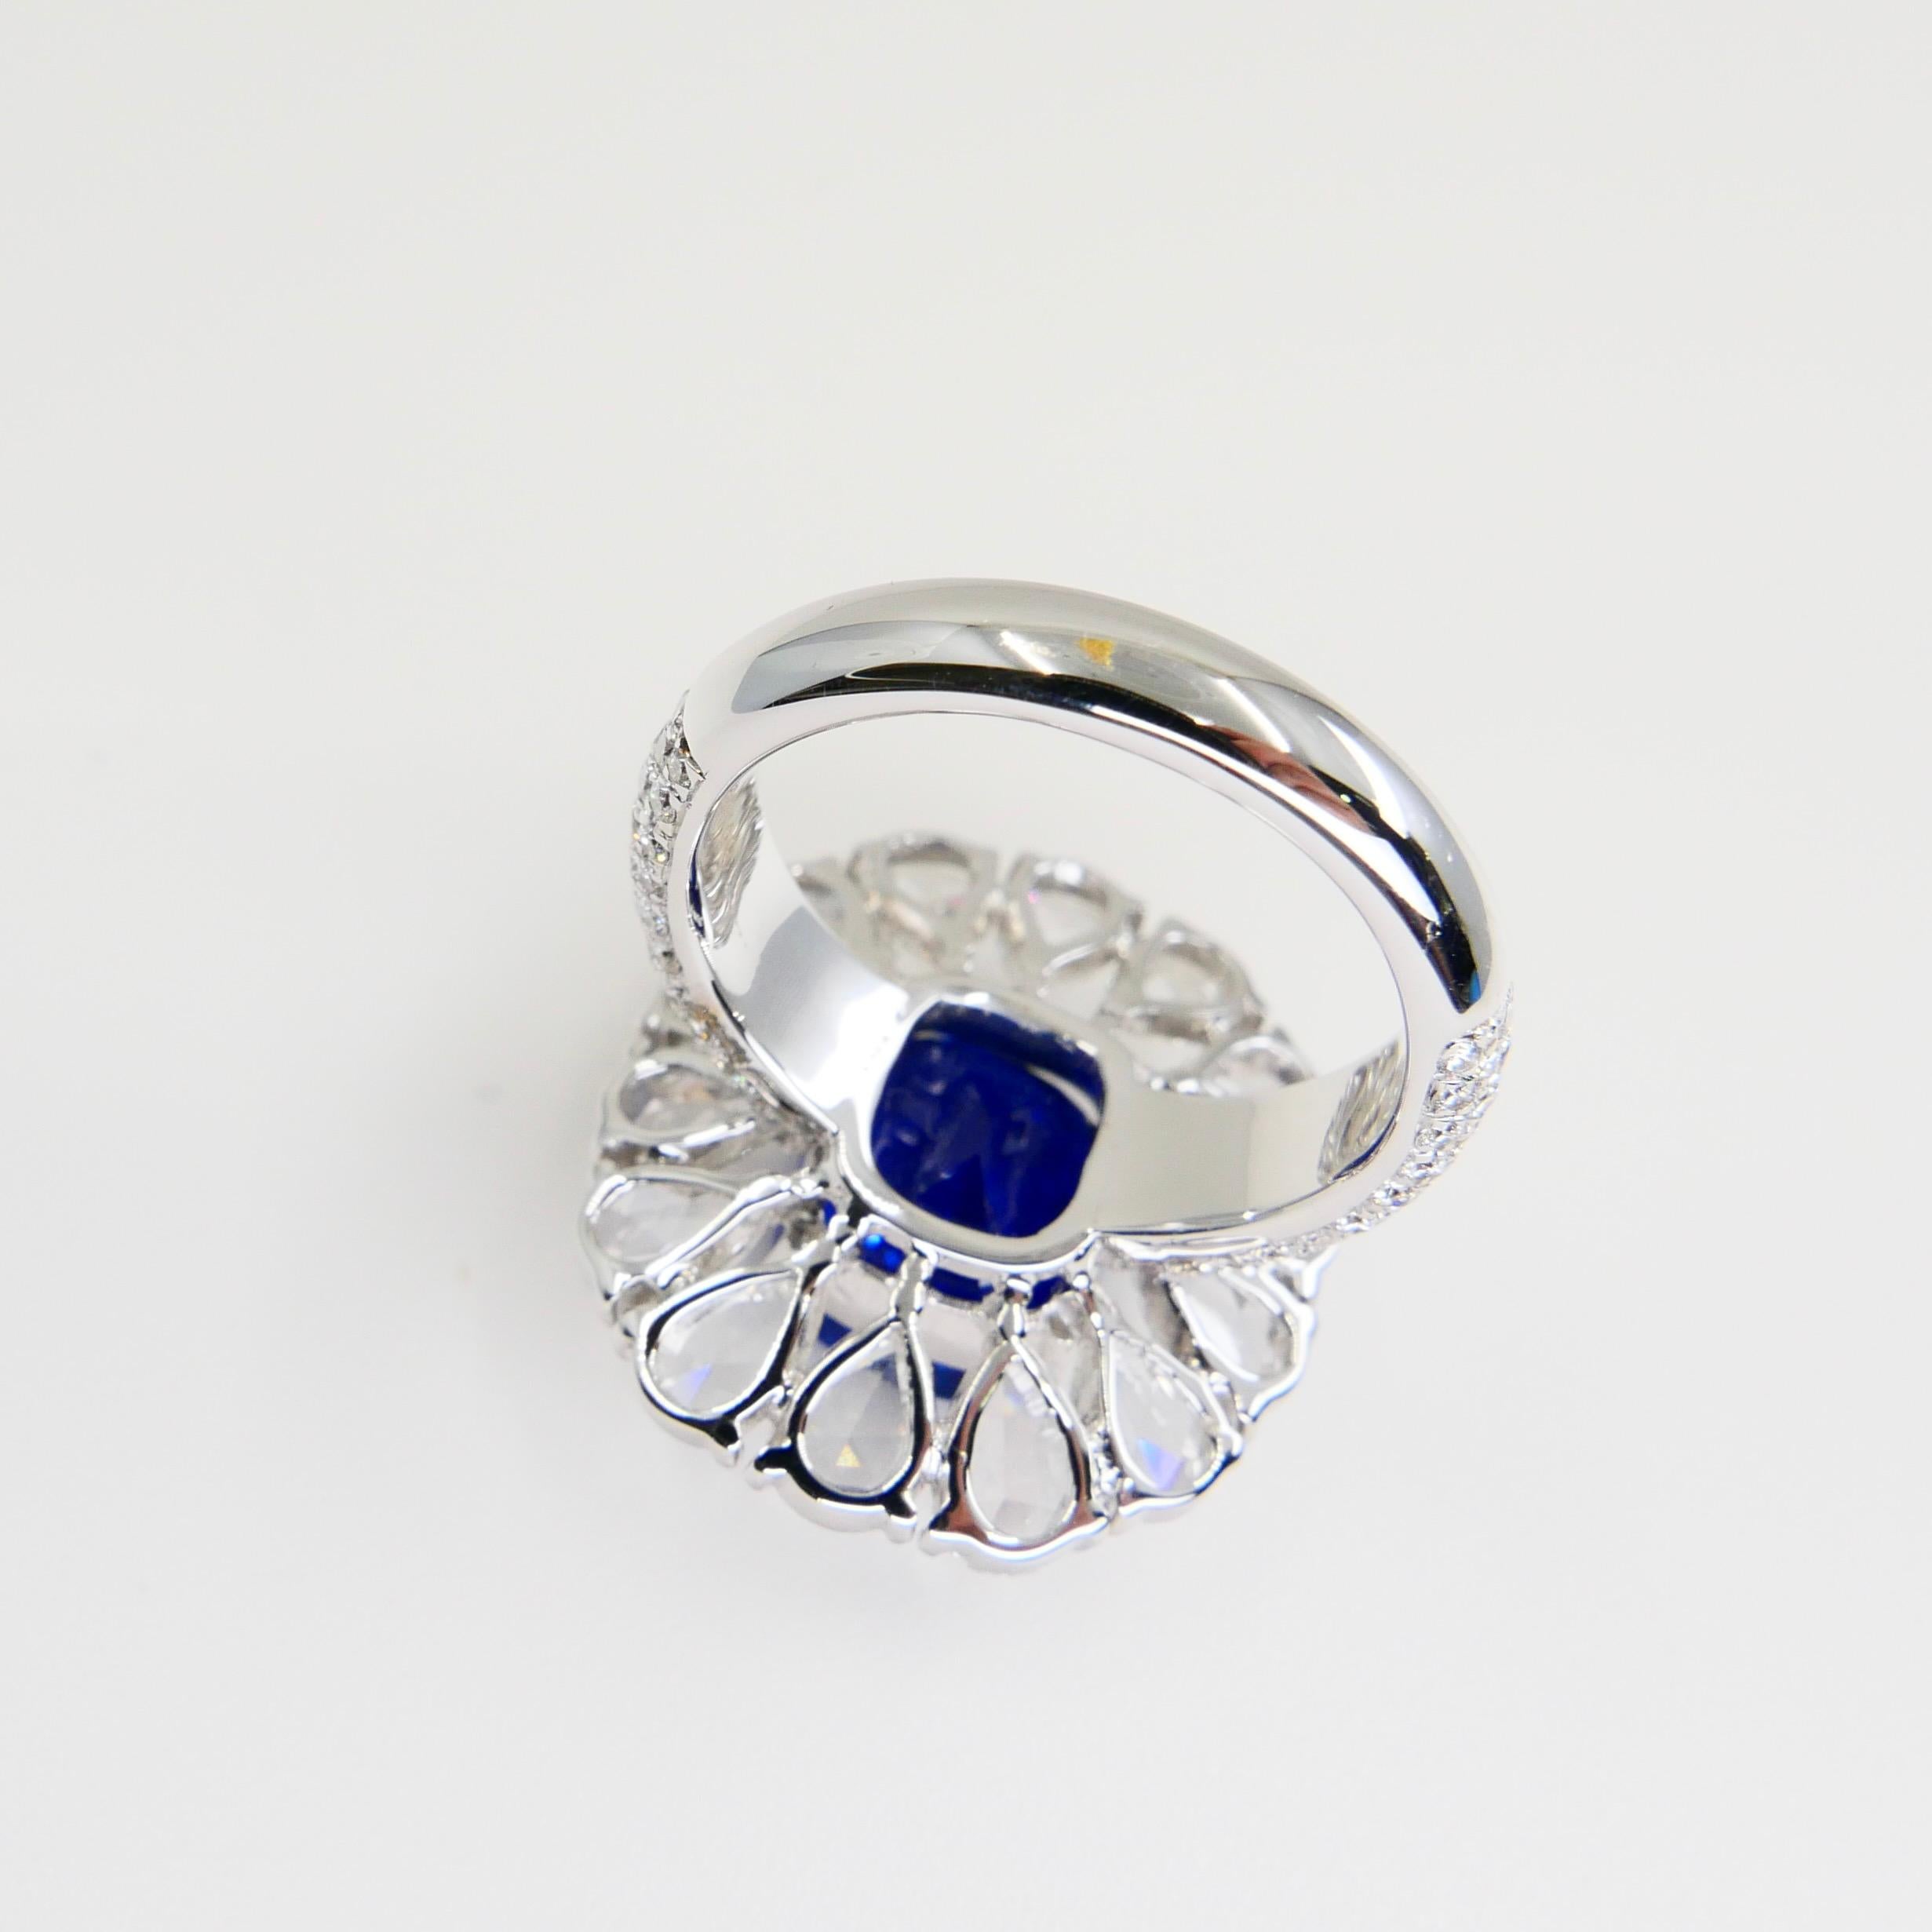 Certified 6 Carat Ceylon Royal Blue Sapphire and Rose Cut Diamond Cocktail Ring 9